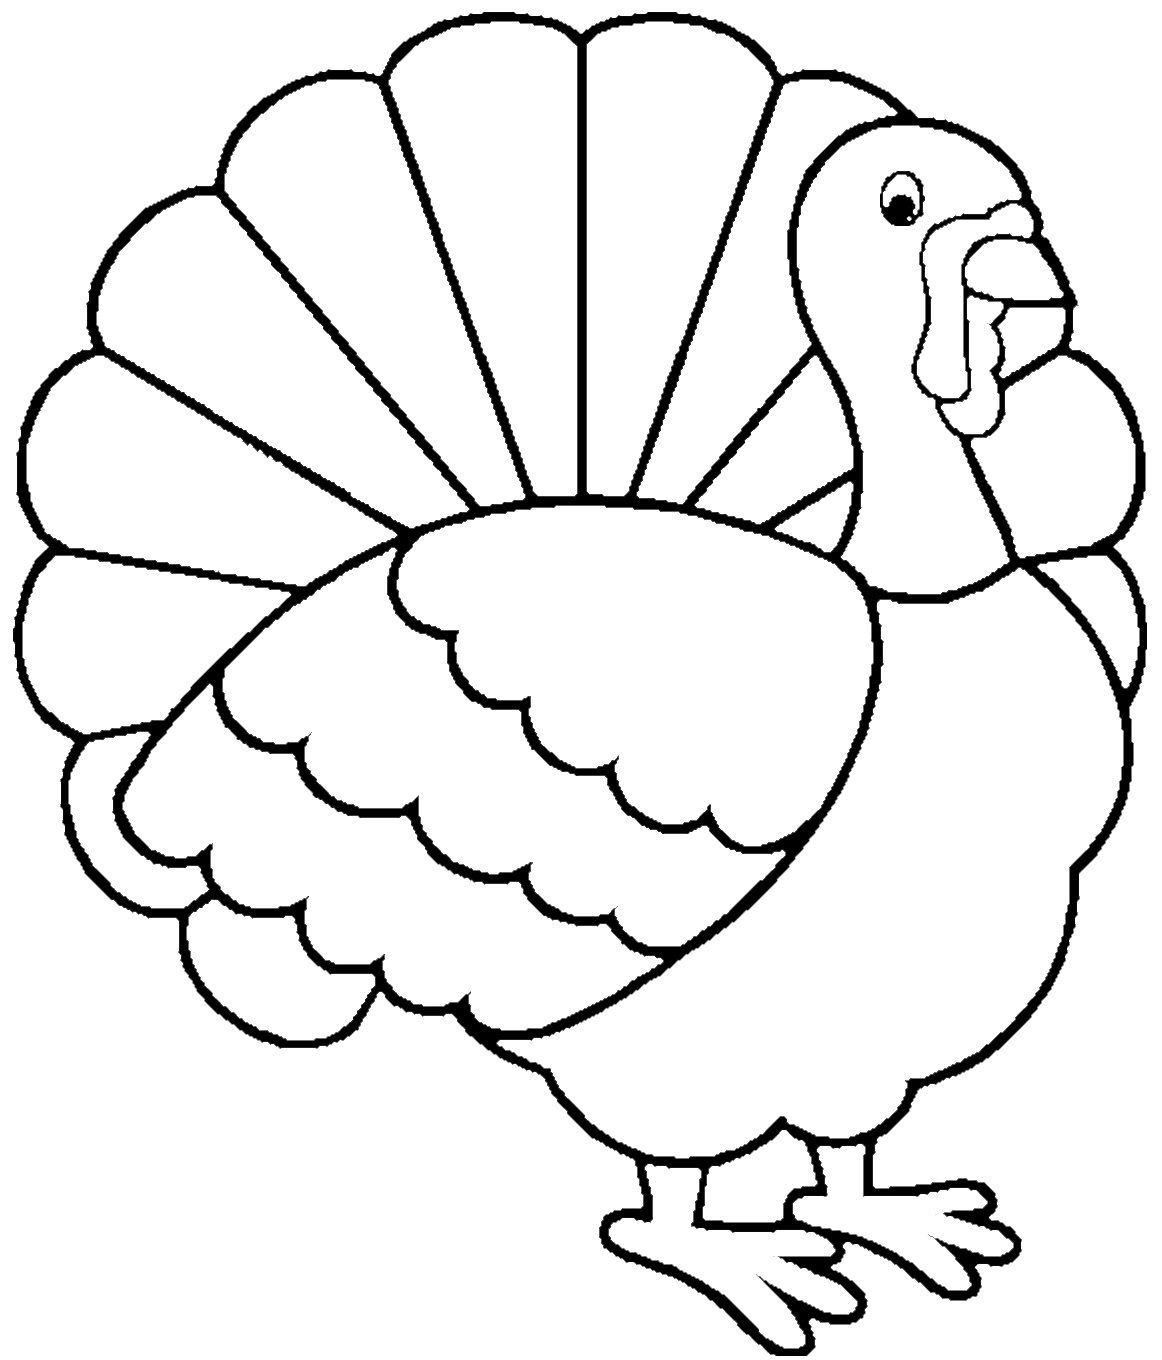 Turkey Coloring Page - Free Large Images | Adult And Children&amp;#039;s - Free Printable Turkey Coloring Pages